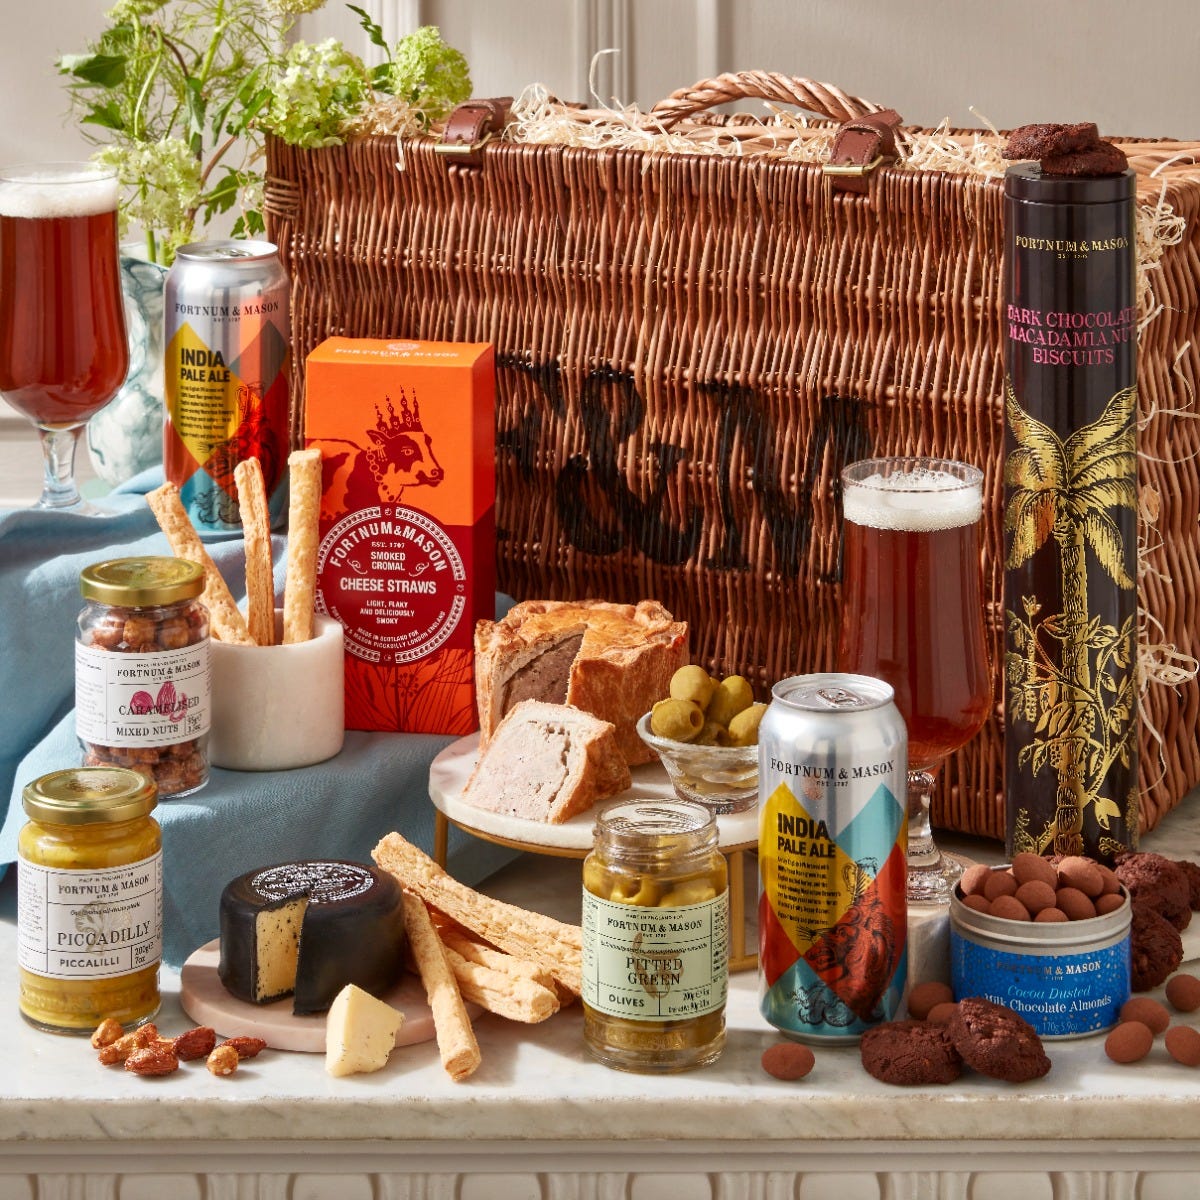 The Beers and Cheers Hamper, Cheese, Fortnum & Mason